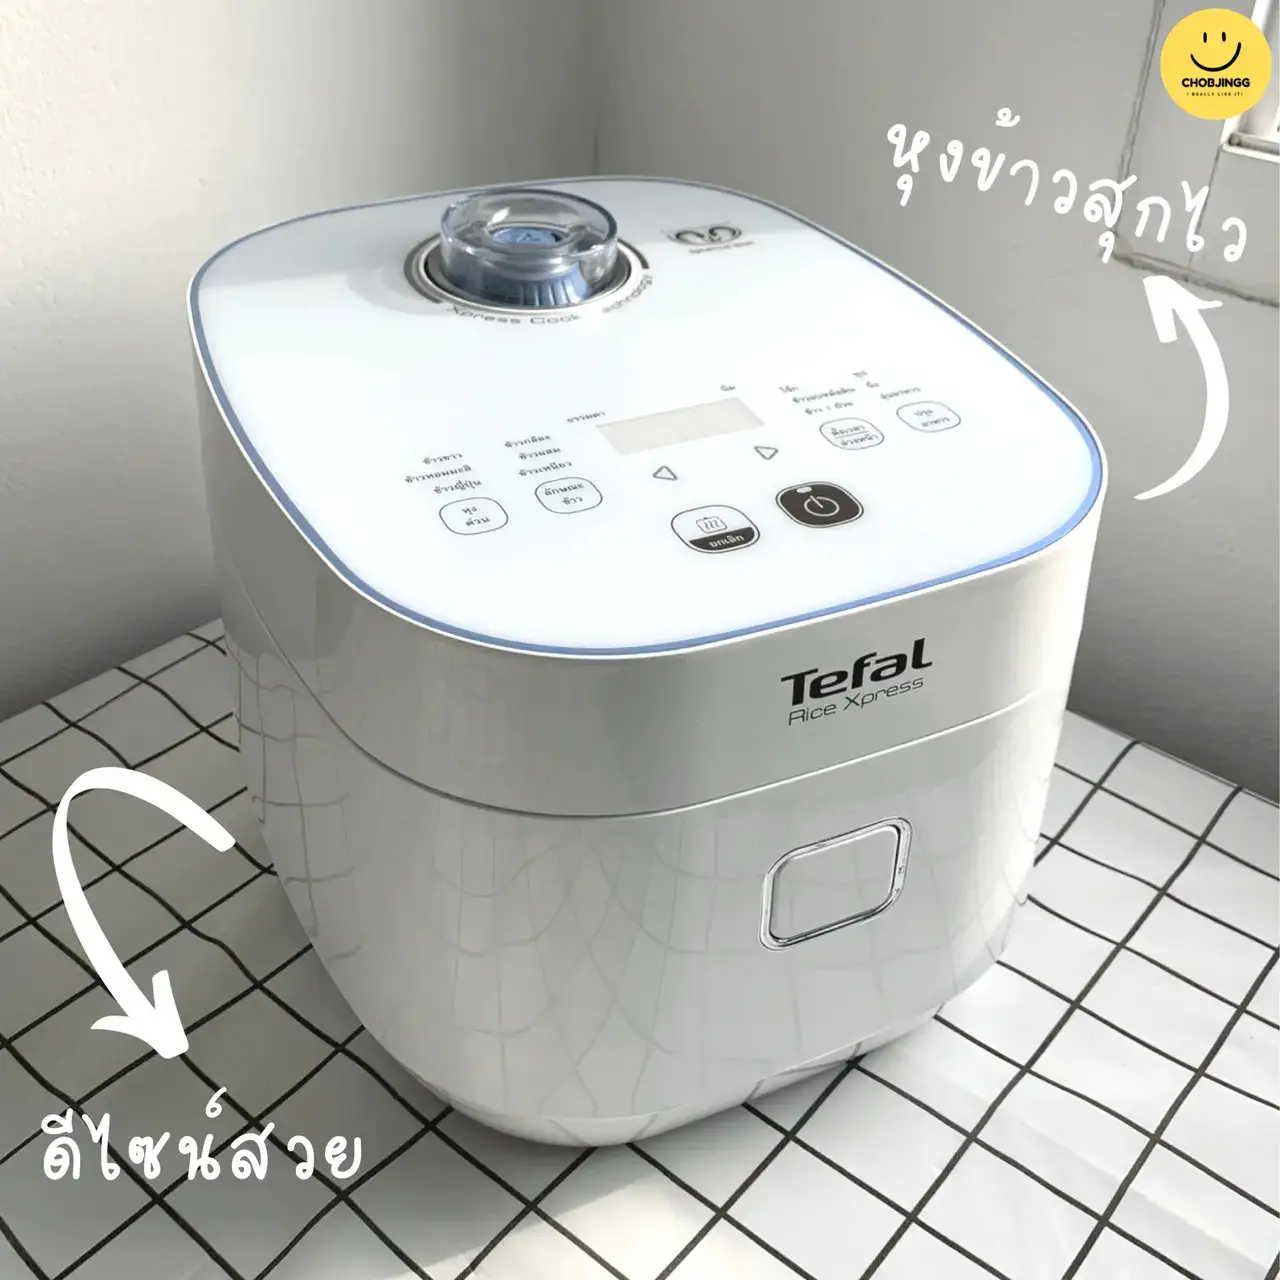 4 Simple Rice Cooker Recipes with Tefal Xpress IH Rice Cooker